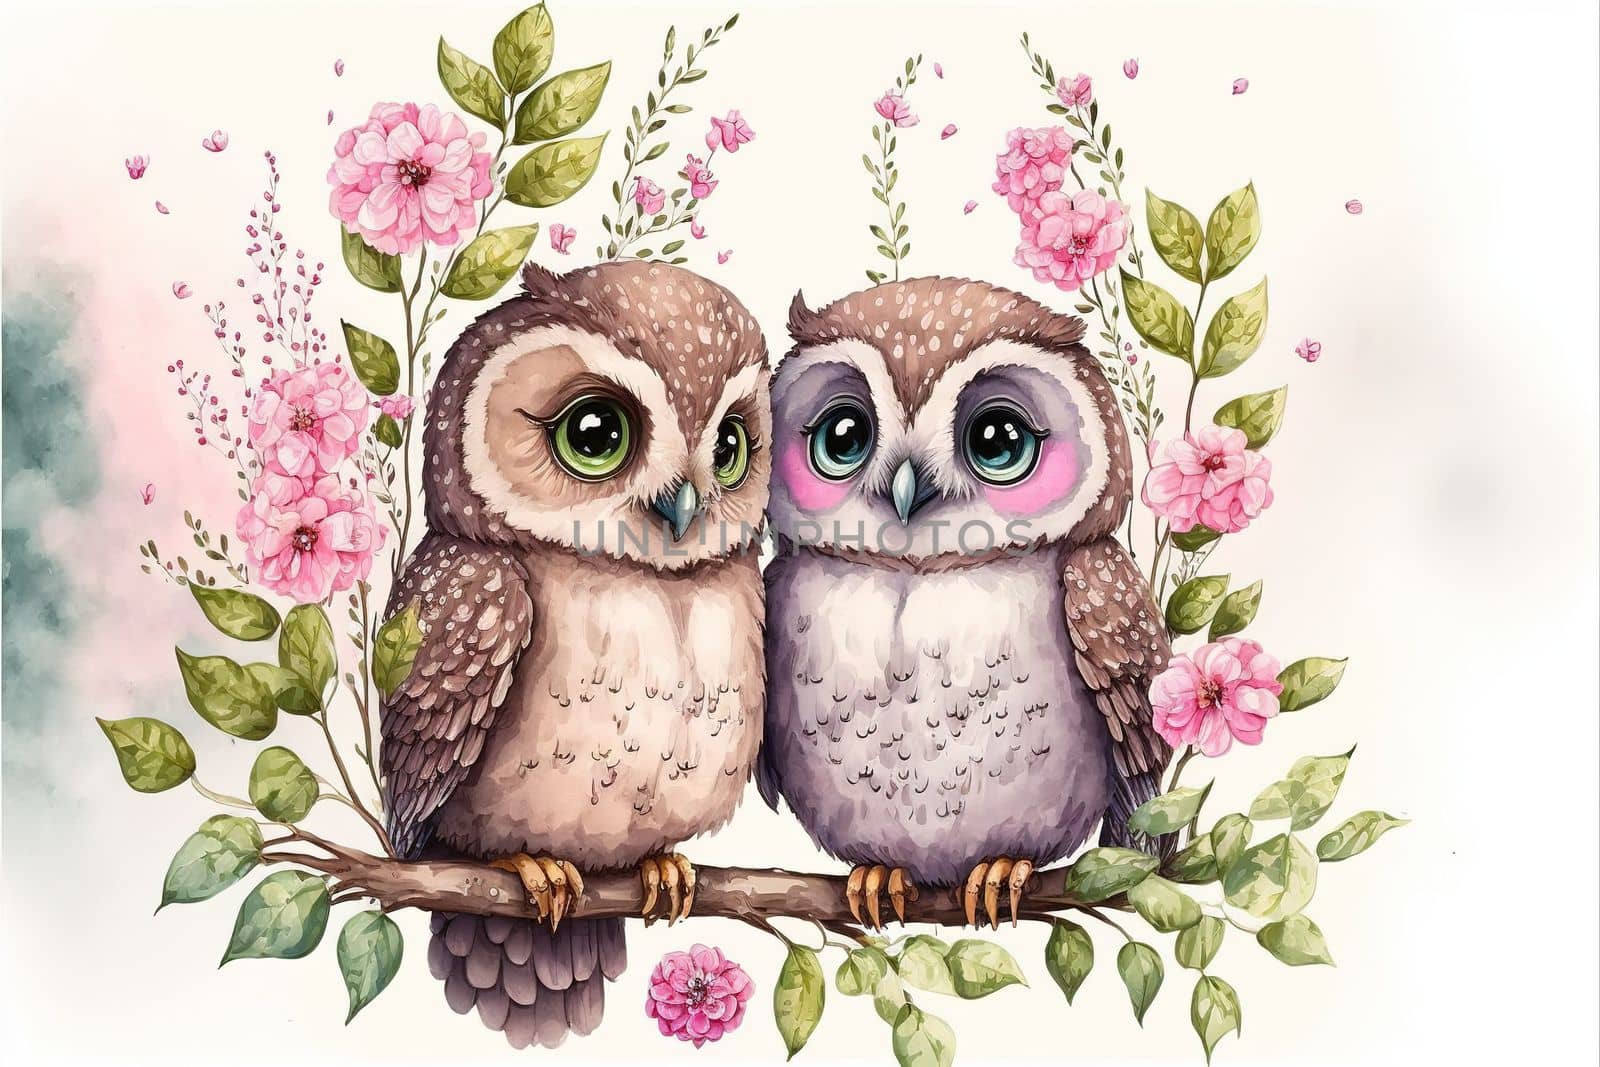 Cute little owl in love on romantic Valentine's day hand drawn cartoon style by biancoblue